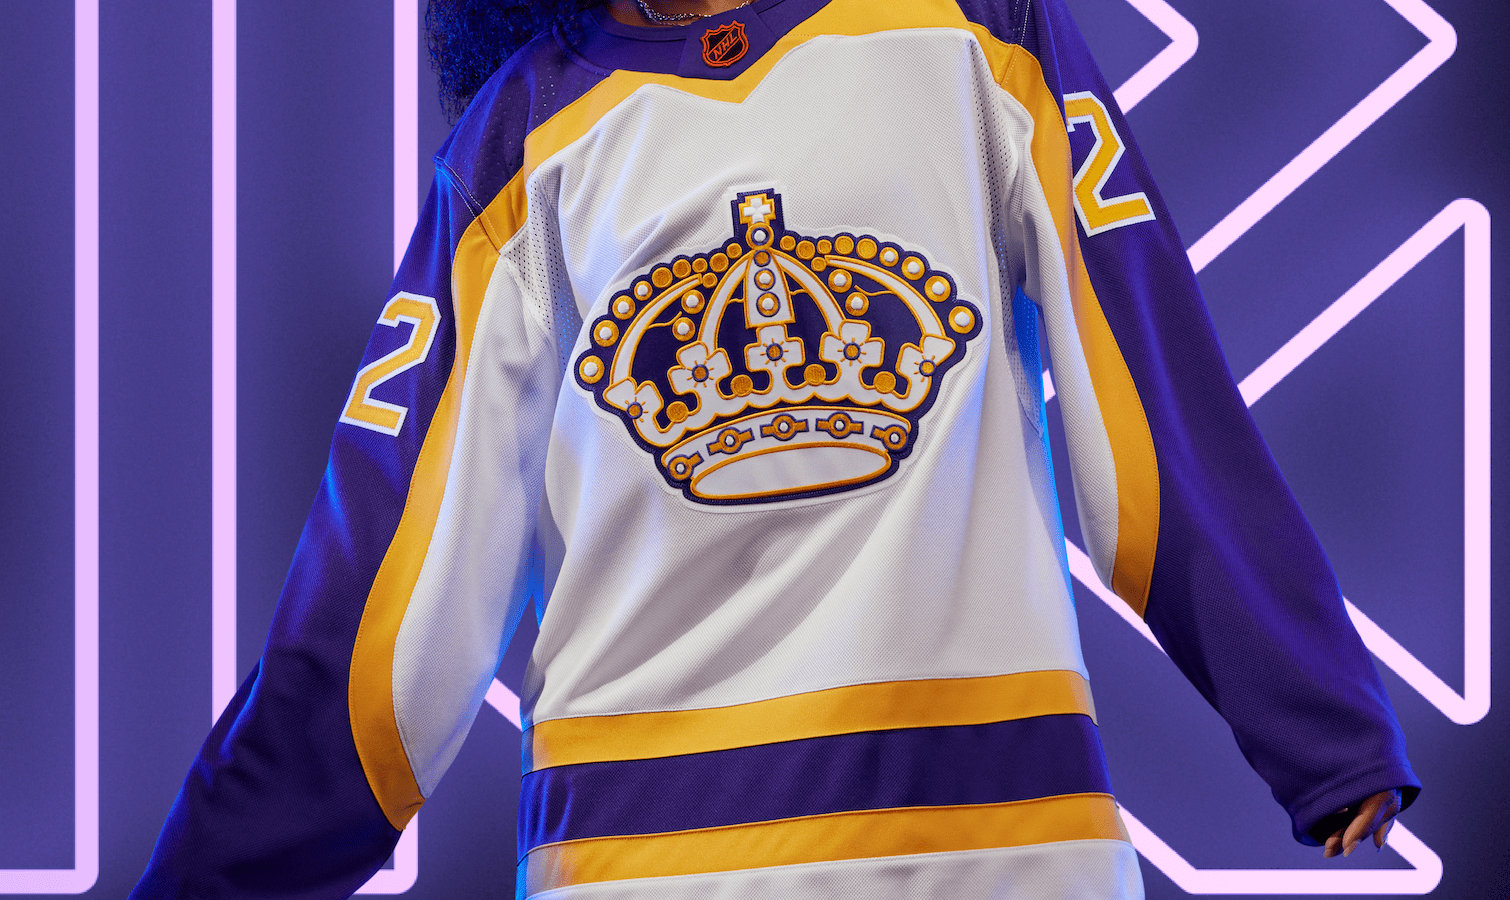 We made a concerted effort to create more jerseys with a white base this year to facilitate more Reverse Retro matchups during the season. This brilliant Kings jersey, a revamp of the 1982 classic, is one of the beneficiaries of that effort.